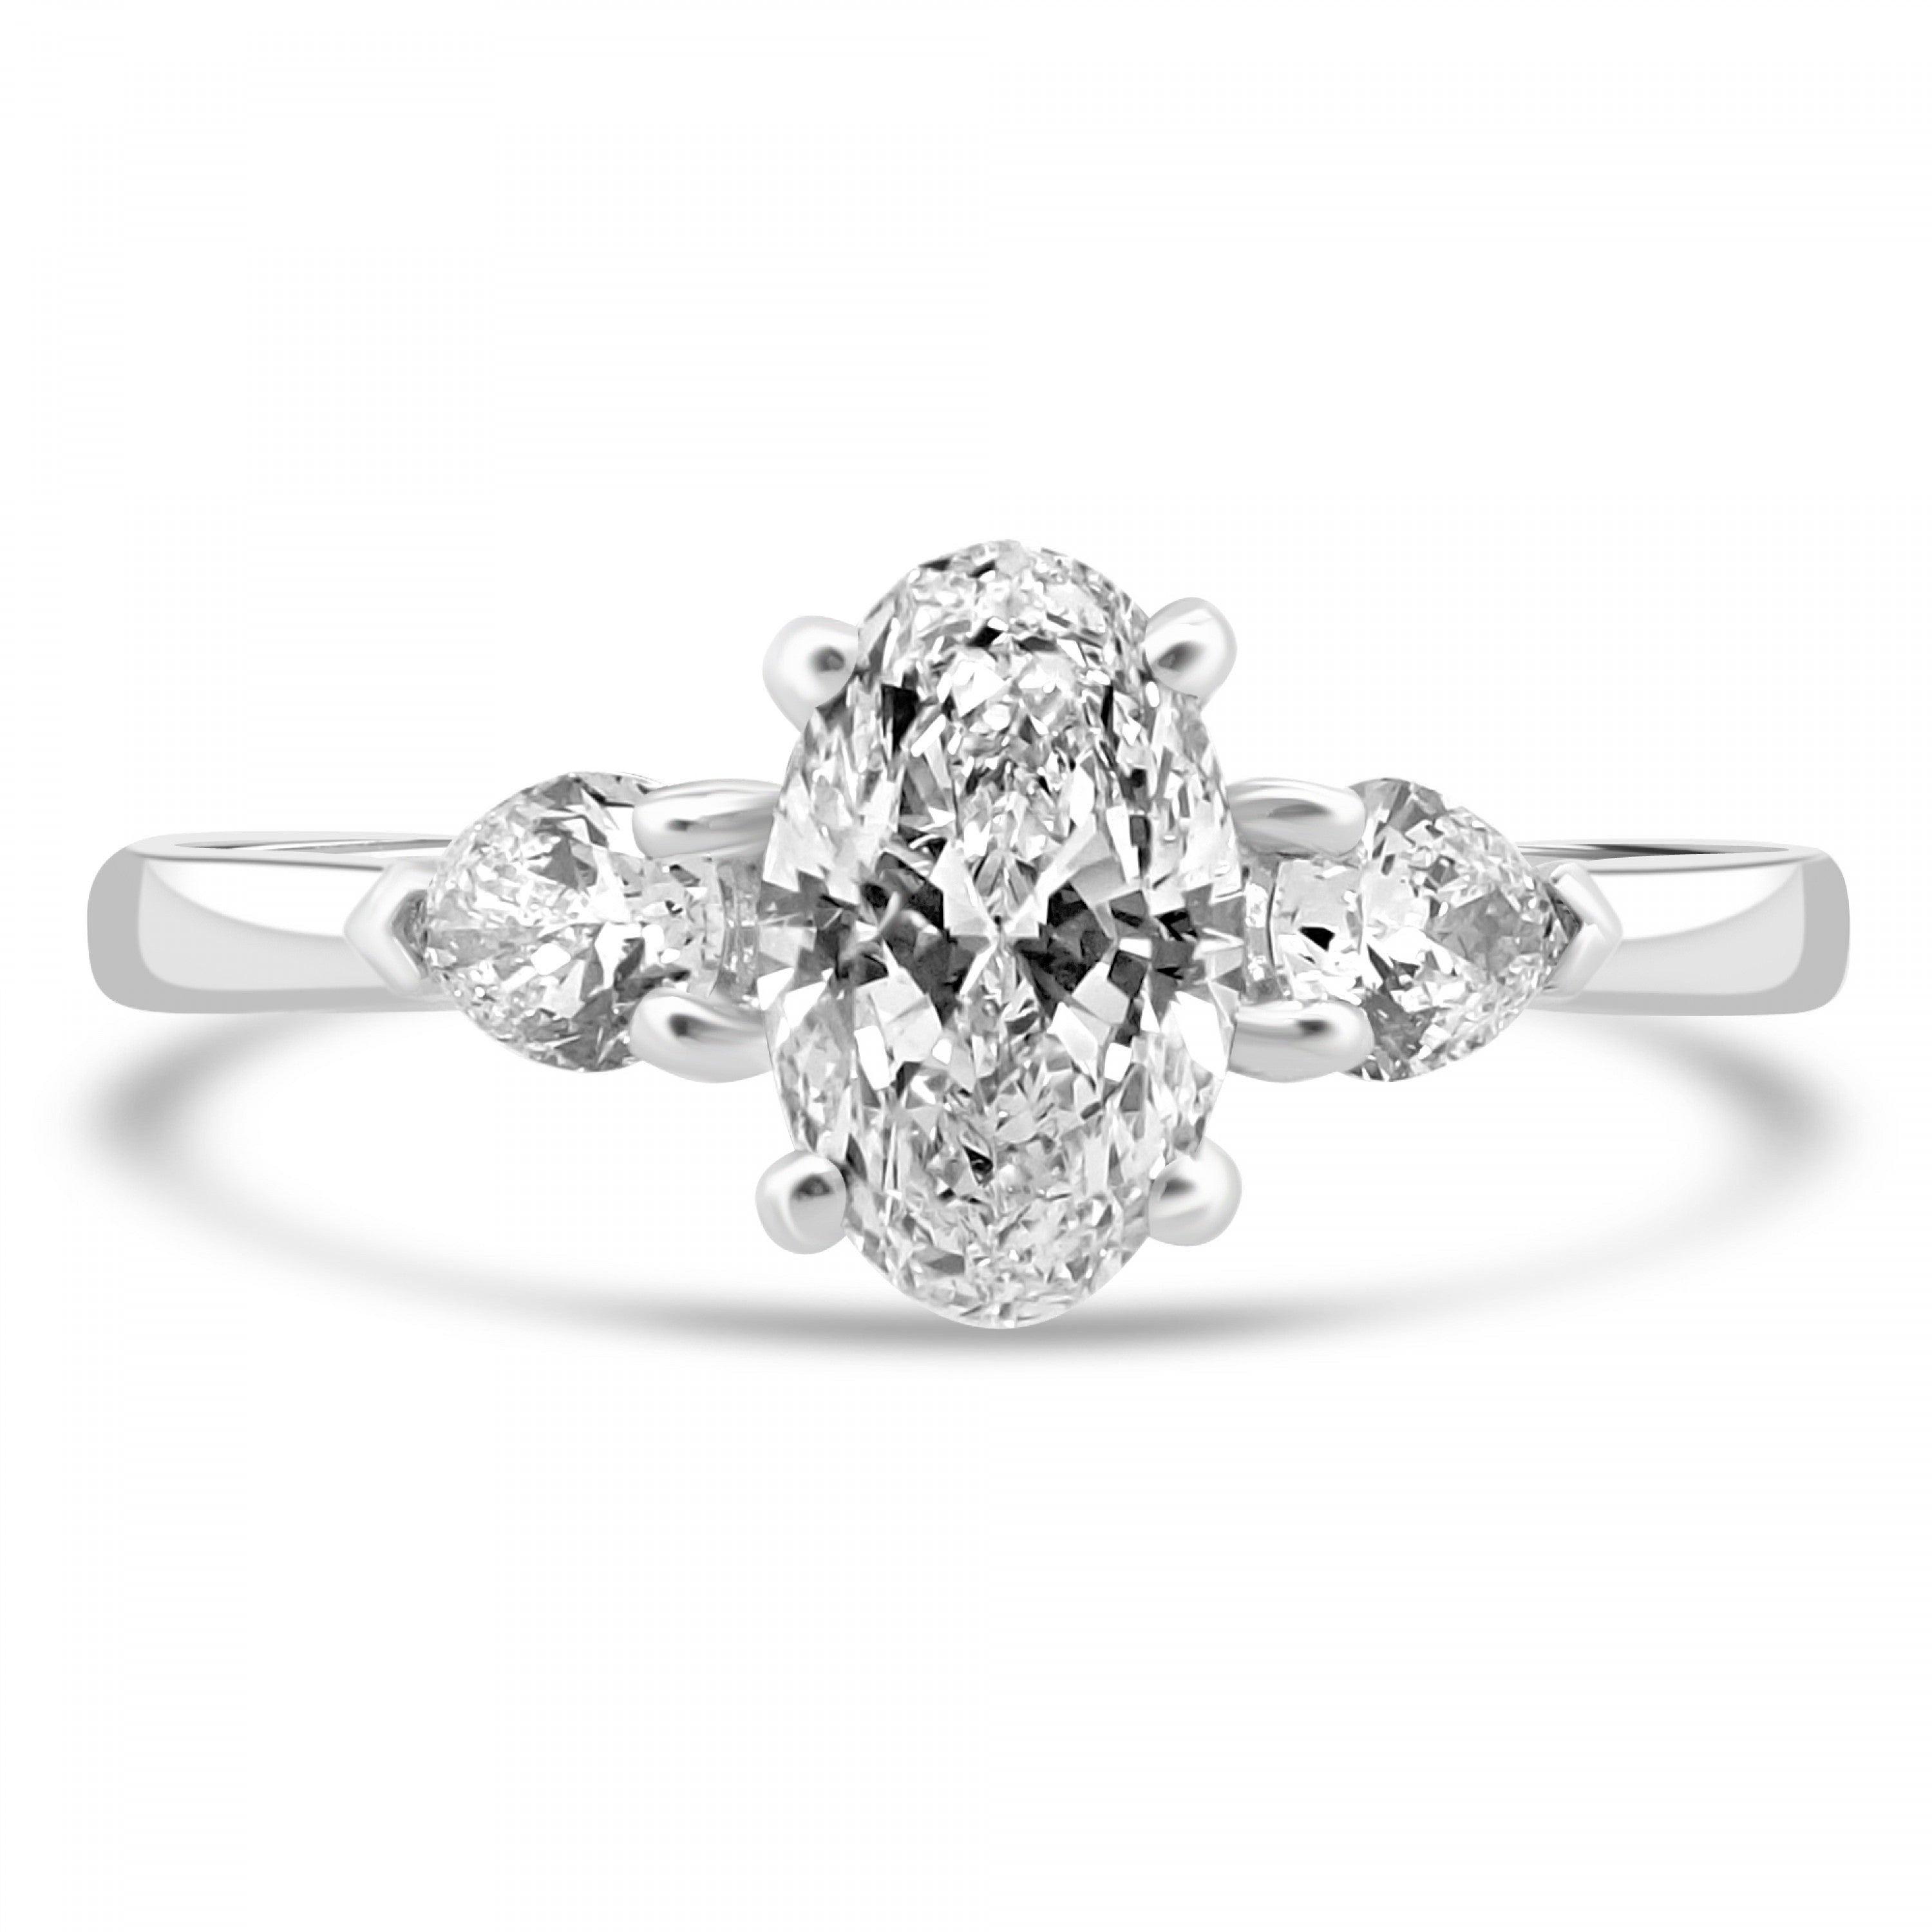 OVAL CUT DIAMOND TRILOGY ENGAGEMENT RING